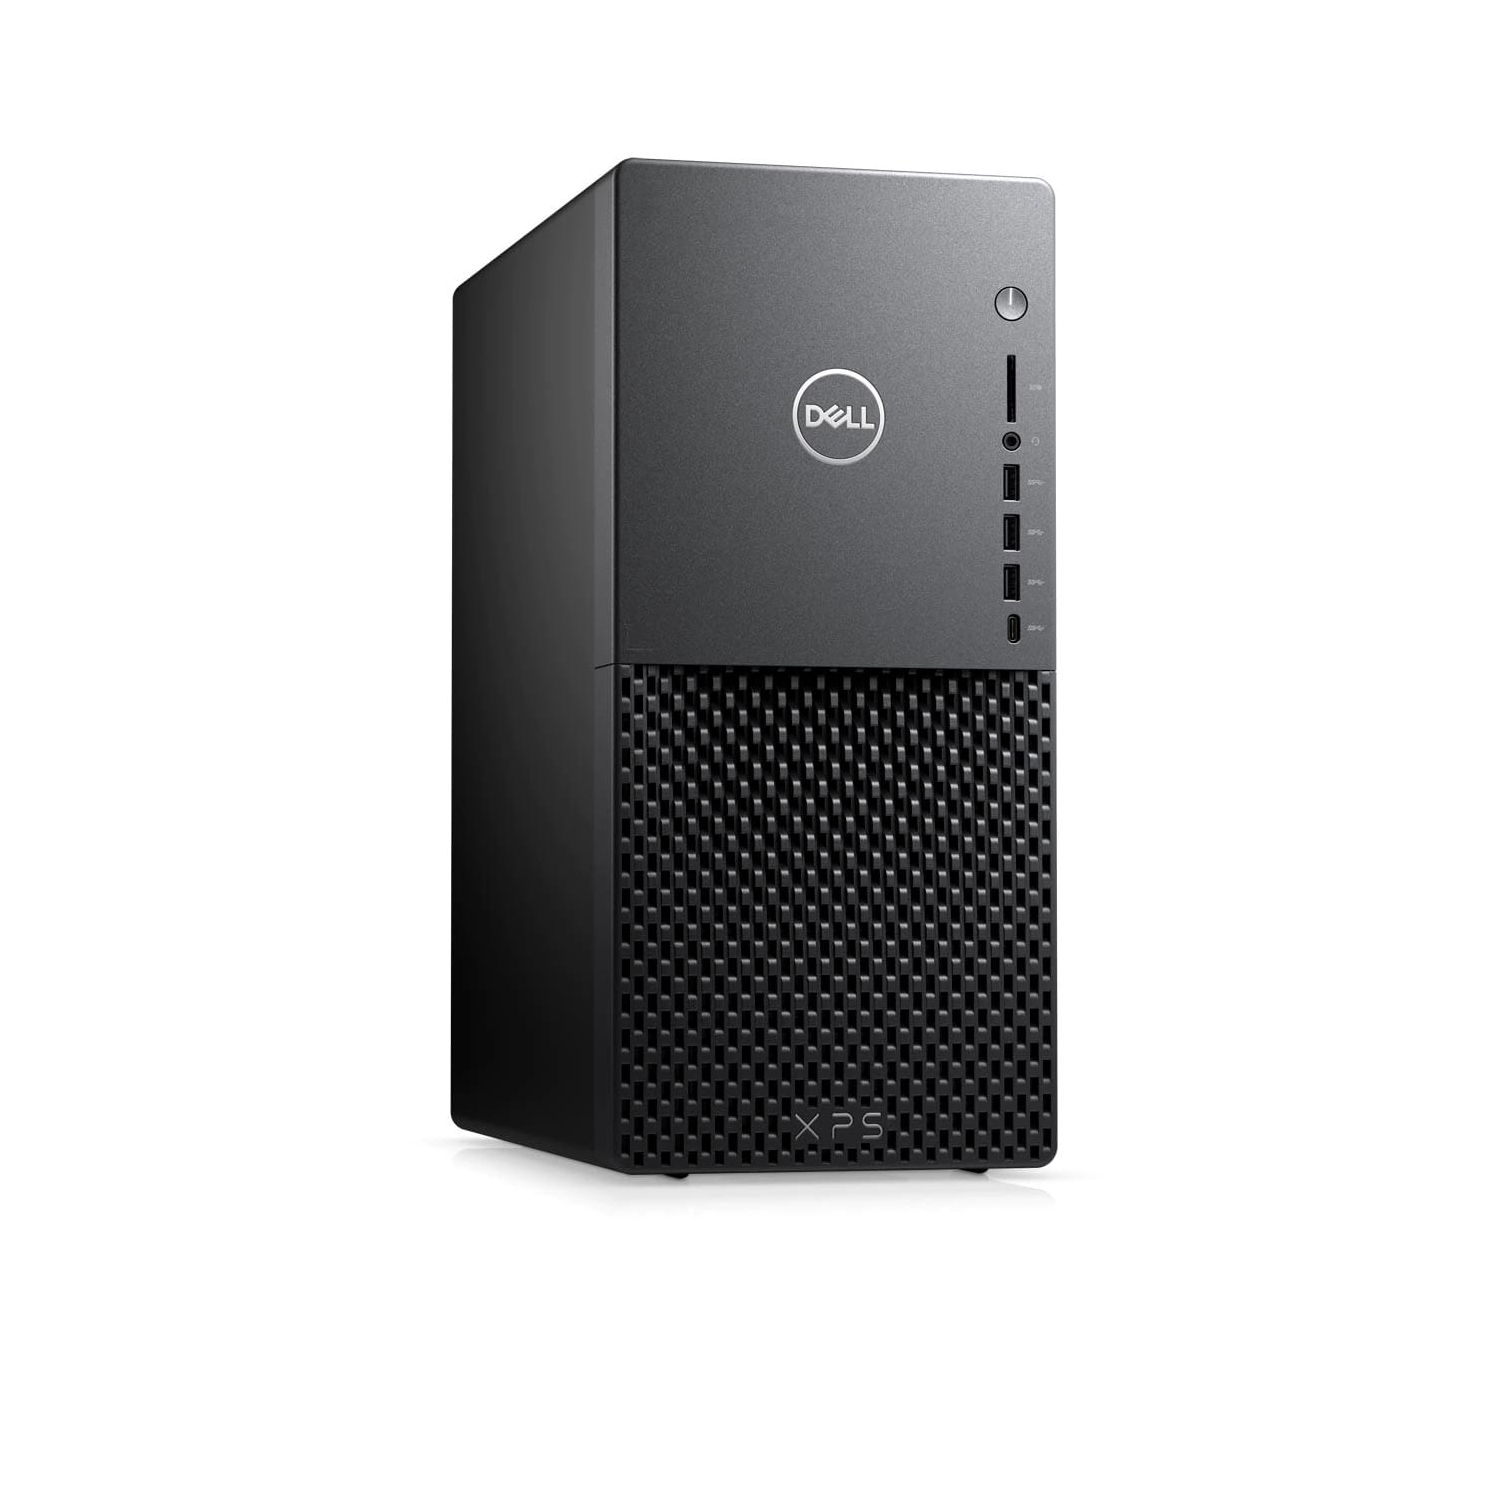 Refurbished (Excellent) - Dell XPS 8940 Desktop (2020) | Core i7 - 1TB HDD + 512GB SSD - 16GB RAM - RTX 3060 | 8 Cores @ 4.9 GHz - 11th Gen CPU Certified Refurbished